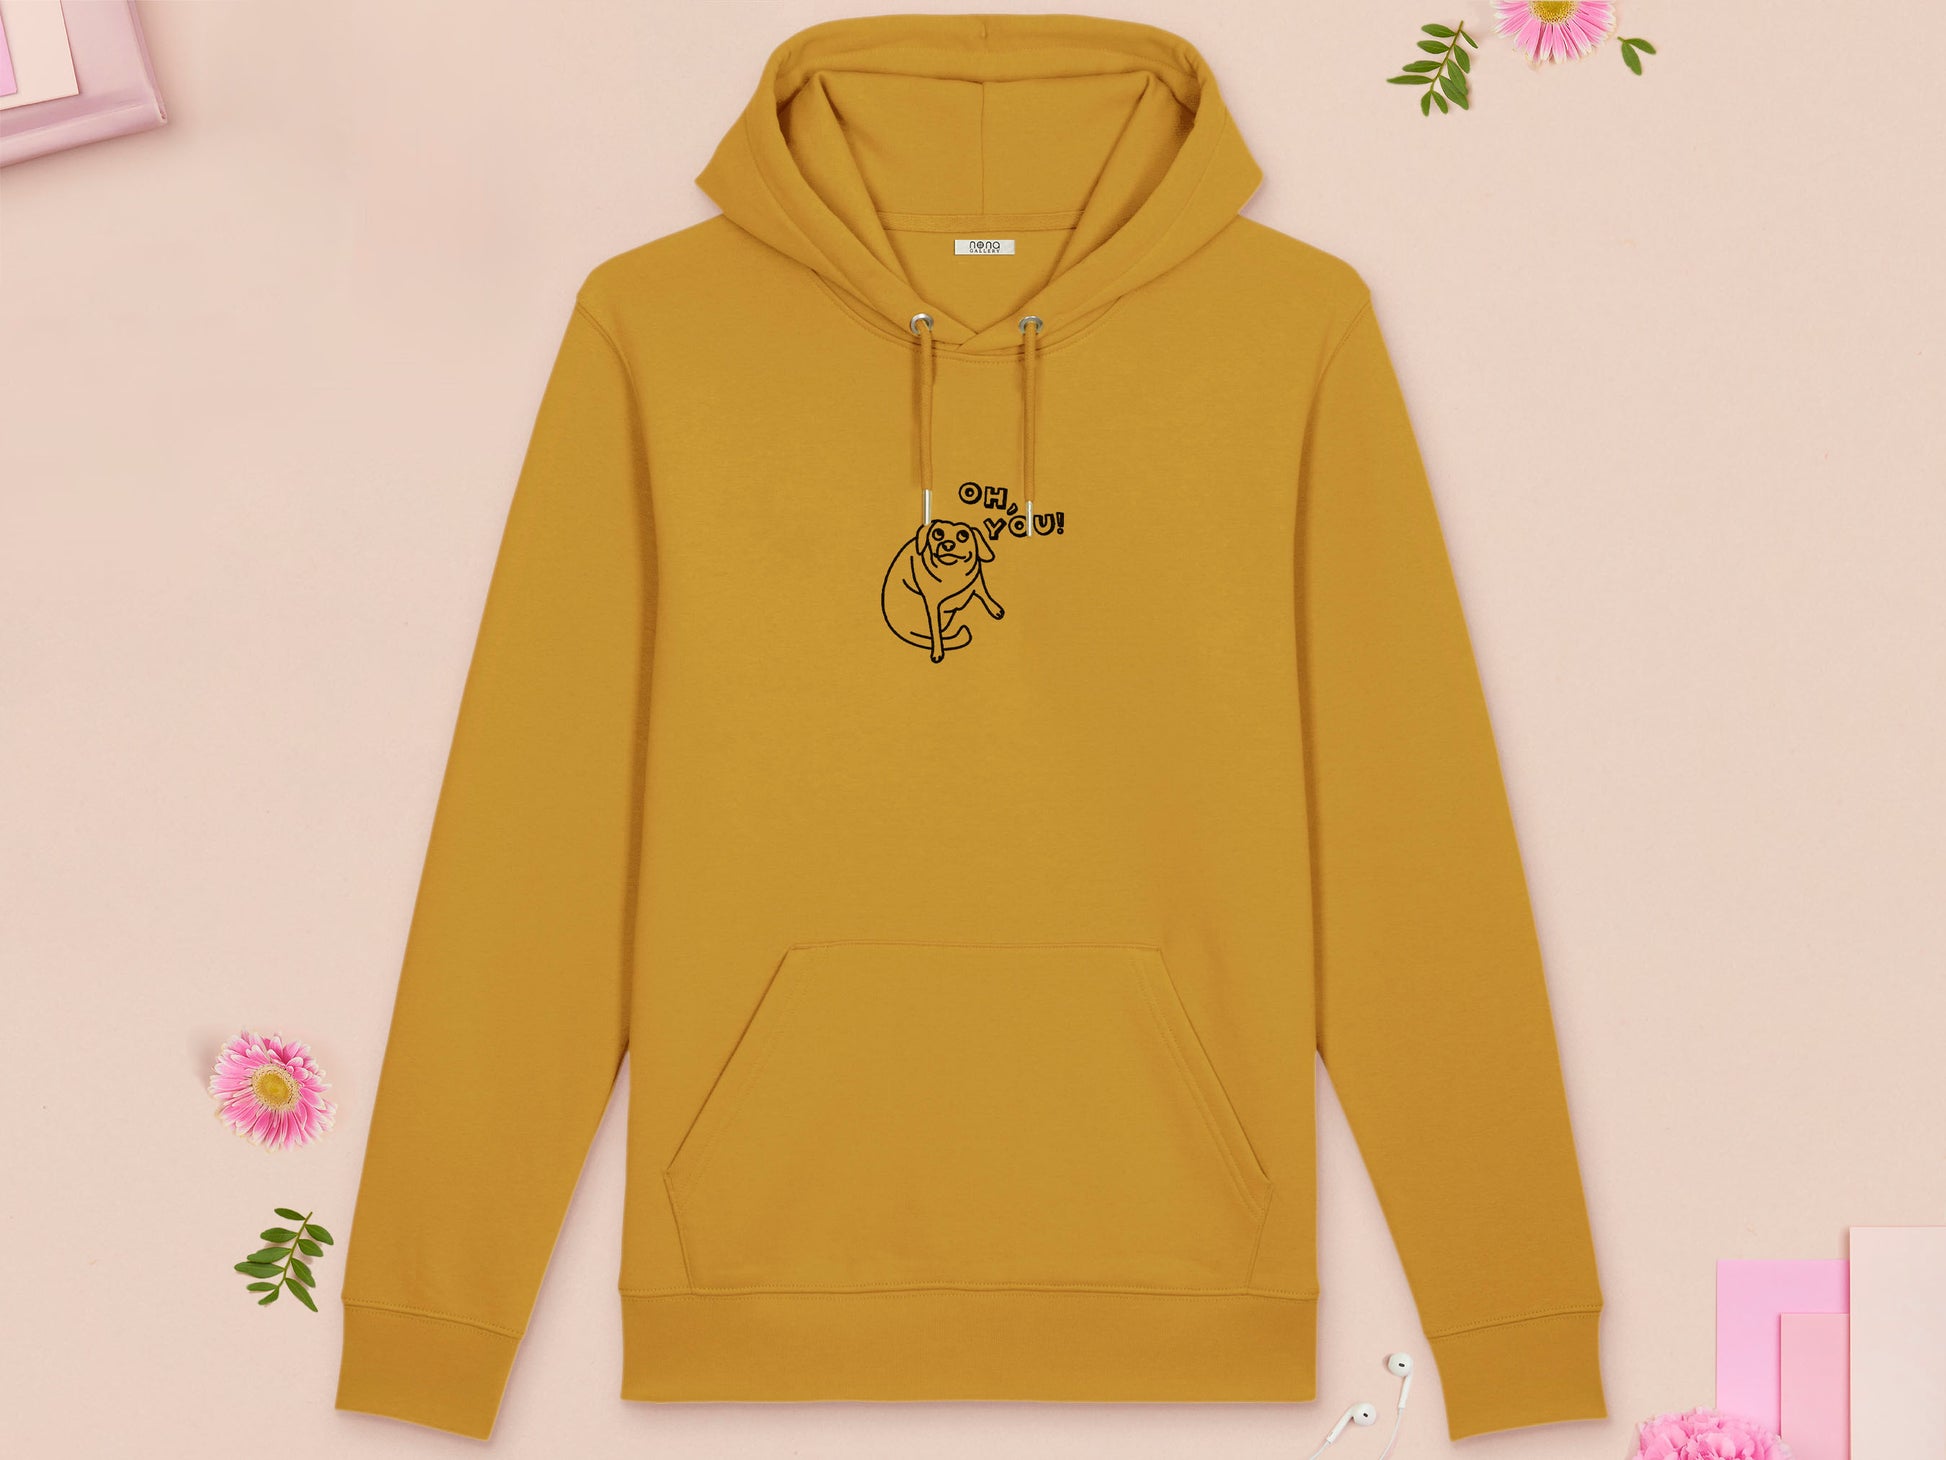 A yellow long sleeve fleece hoodie, with an embroidered black thread design of cute meme dog with cheeky expression and big eyes, with the text Oh You!